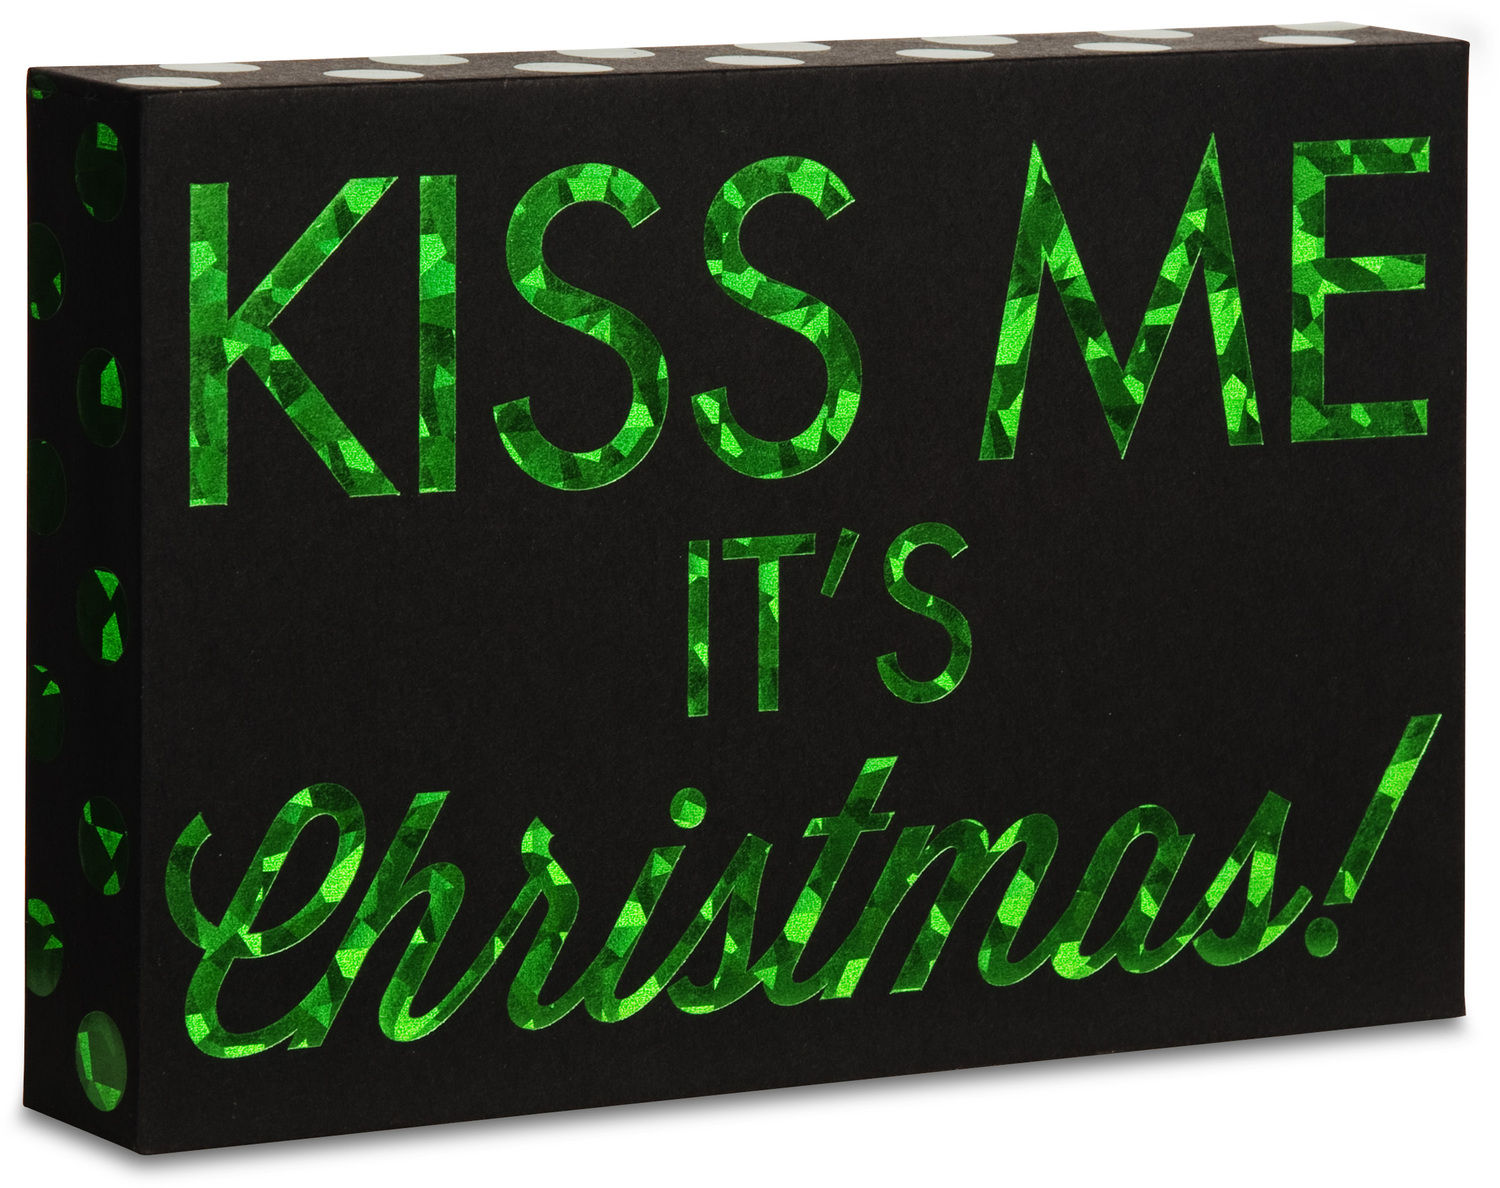 Kiss Me it's Christmas by Hiccup - Kiss Me it's Christmas - 6" x 4" Plaque